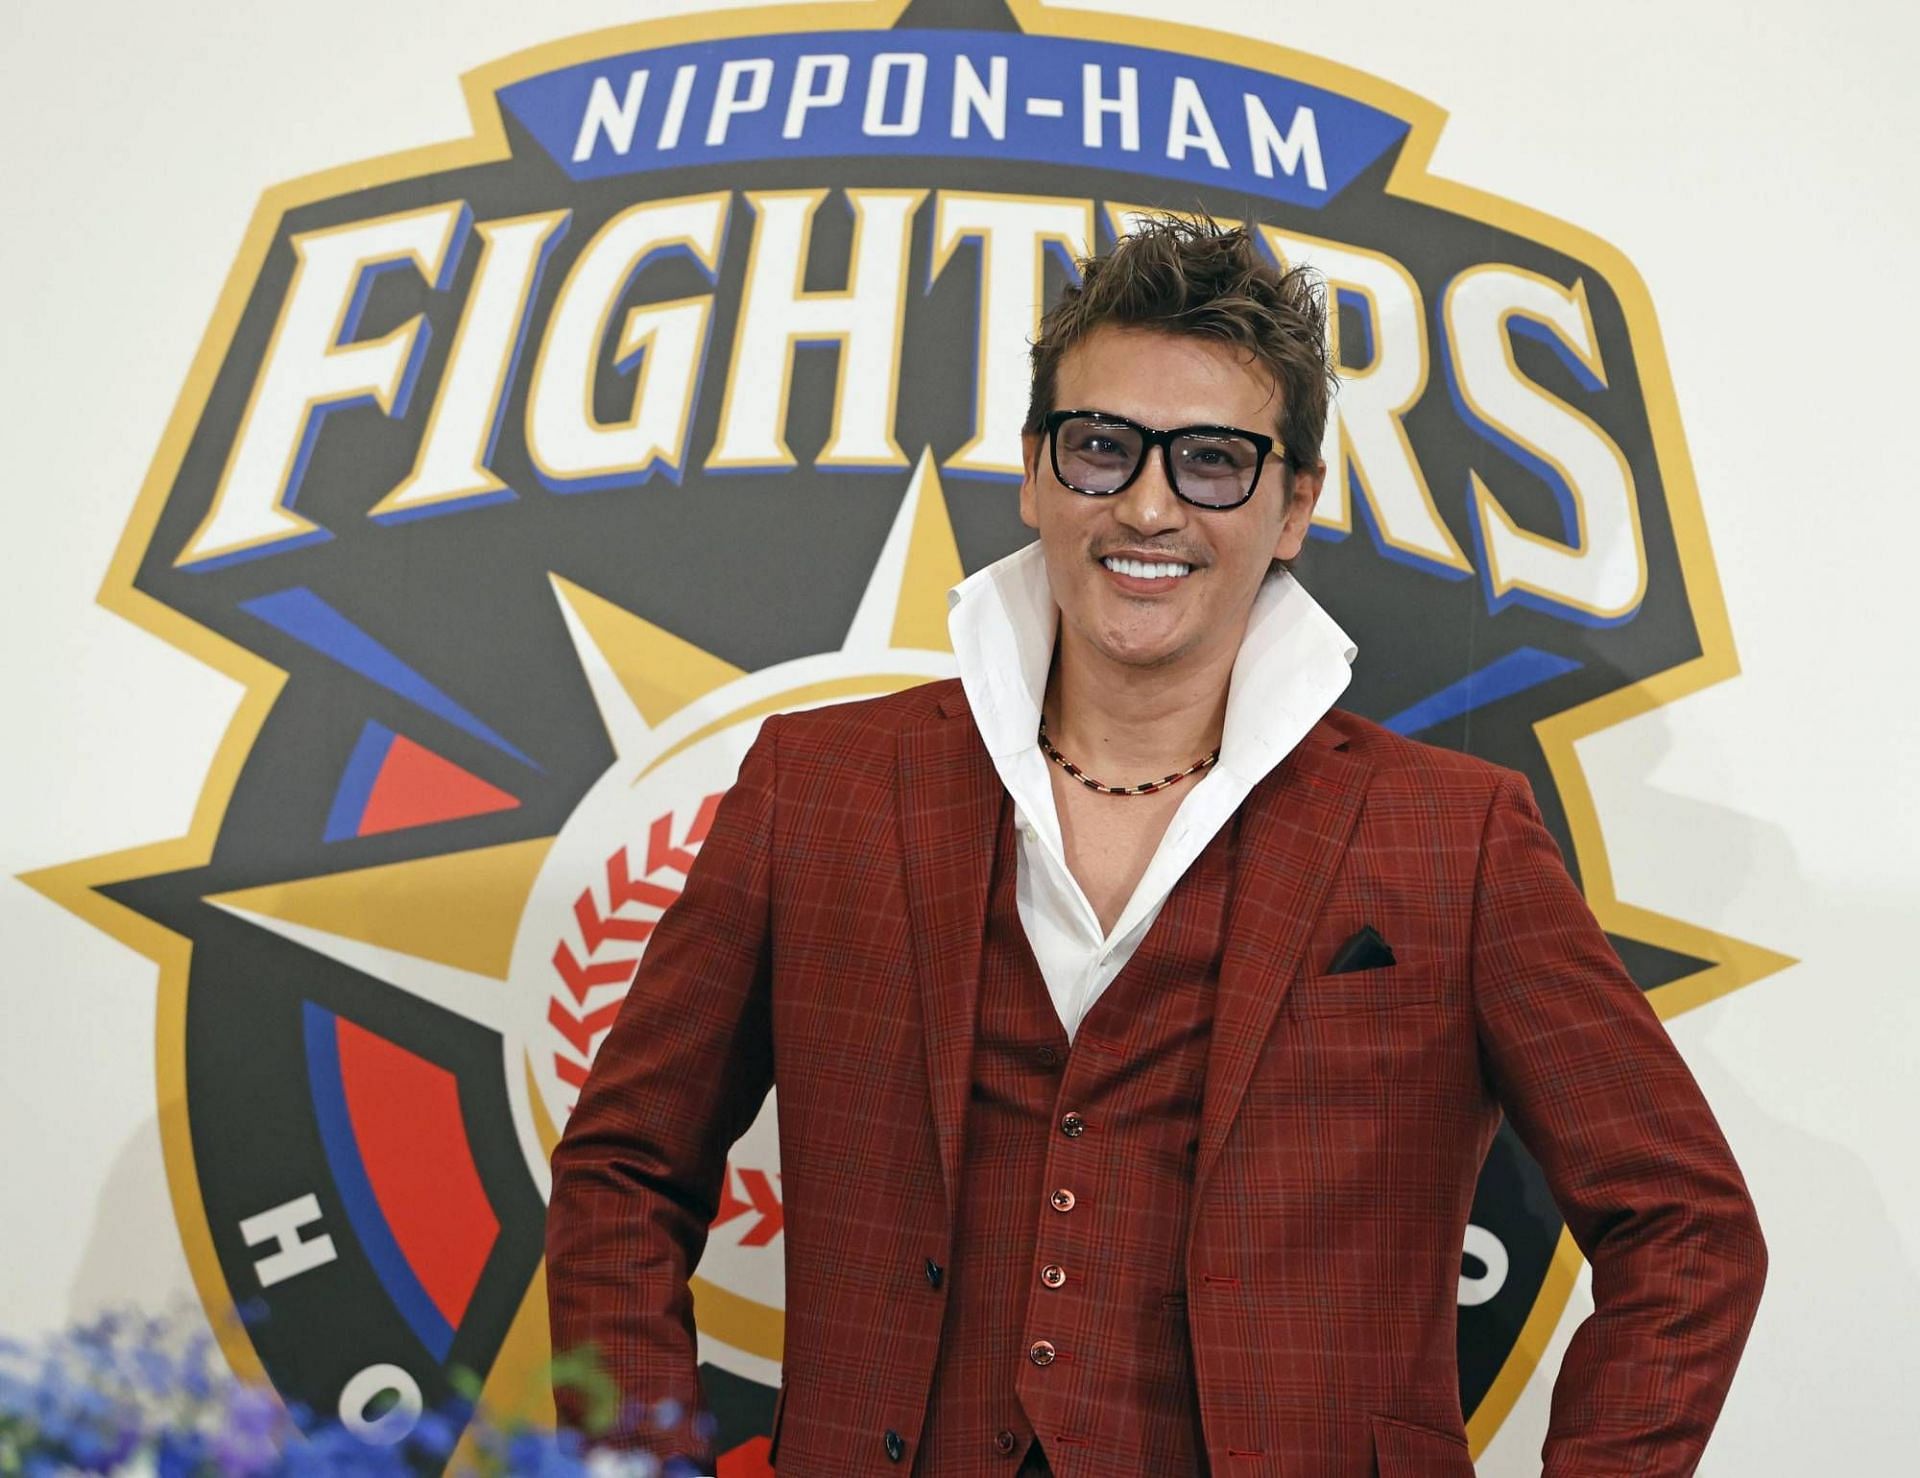 OOTP21: HOFF COMES TO JAPAN! - Nippon-Ham Fighters Ep2: Out of the